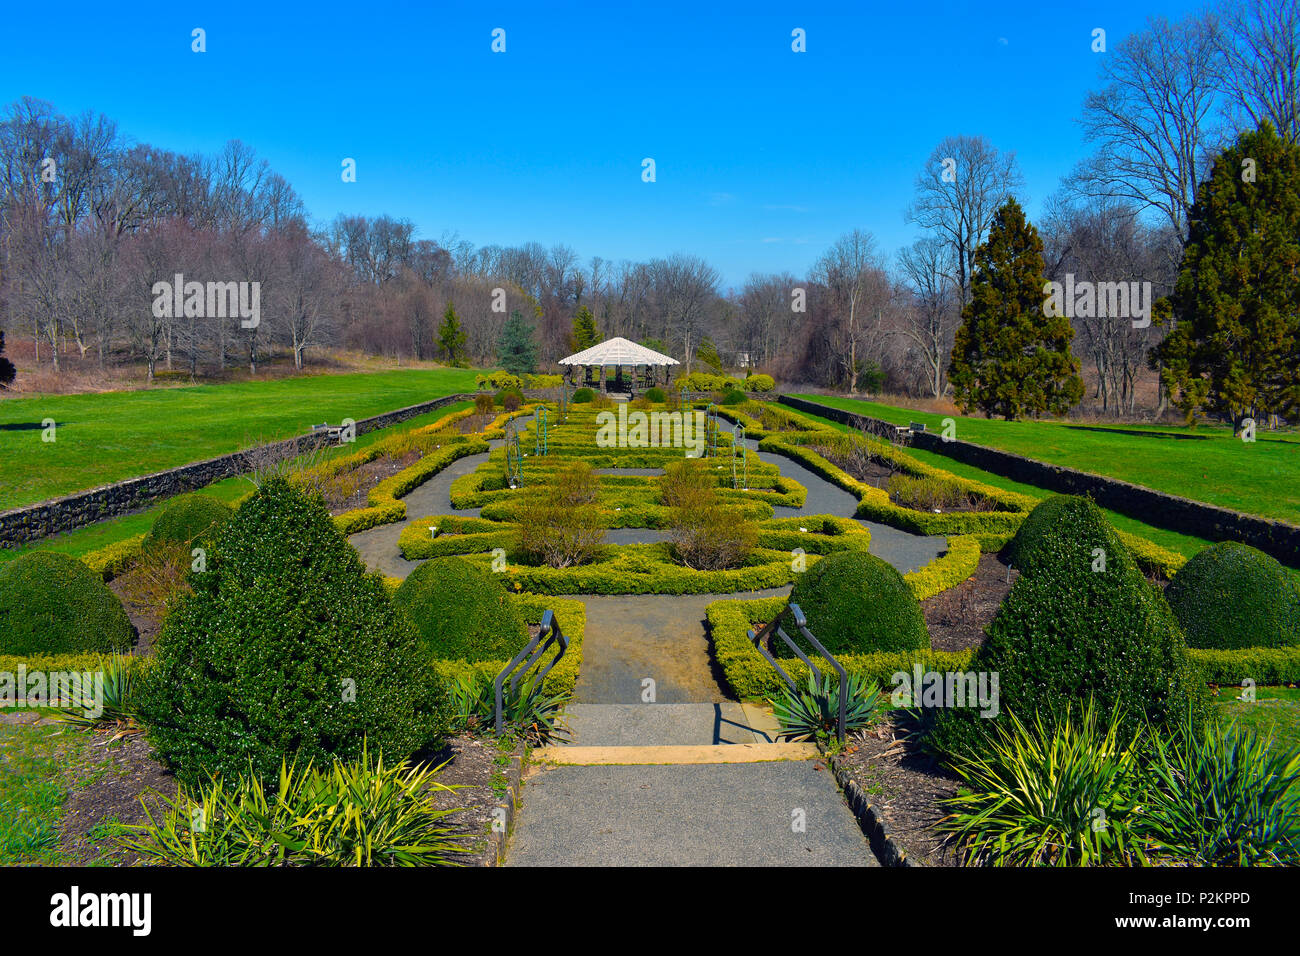 Wide Angle View Of The Gardens At Deep Cut Gardens At Middletown